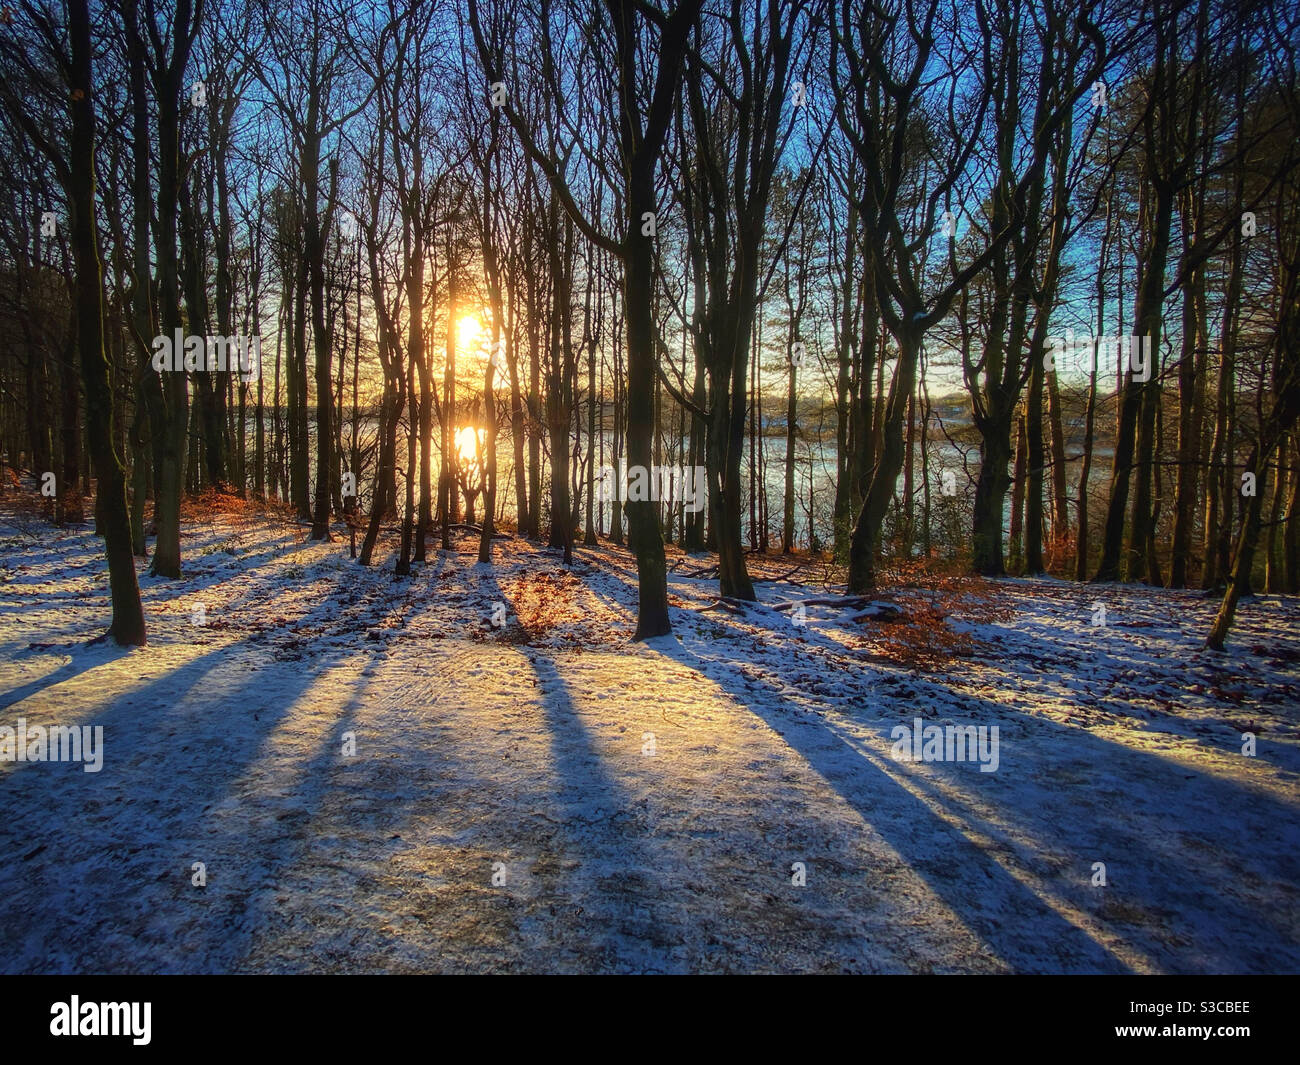 Late afternoon winter sun shining through trees at Rivington, Lancashire with a covering of snow on the ground Stock Photo